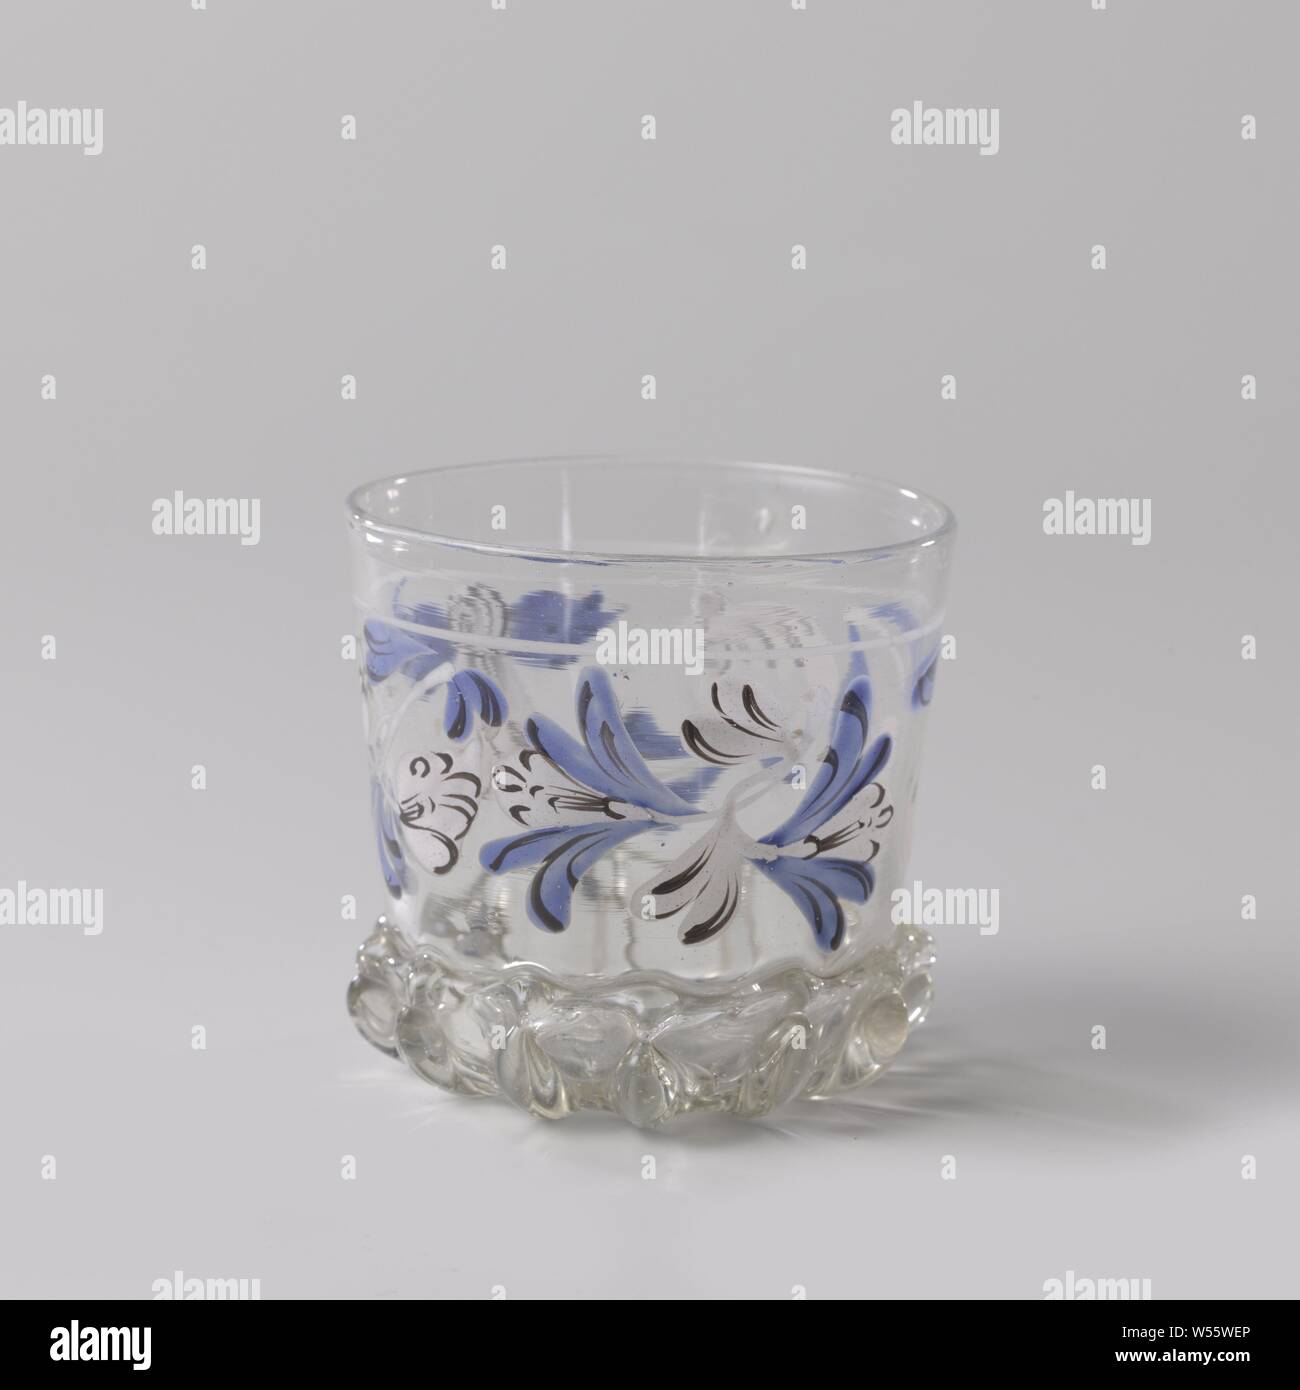 Cup with flower vines, Bottom and stand ring optically blown in star-shaped ribs. Cylinder-shaped body with flower vines in white, black and blue., anonymous, Midden-Duitsland, c. 1700, glass, glassblowing, h 6.3 cm × d 6.6 cm Stock Photo